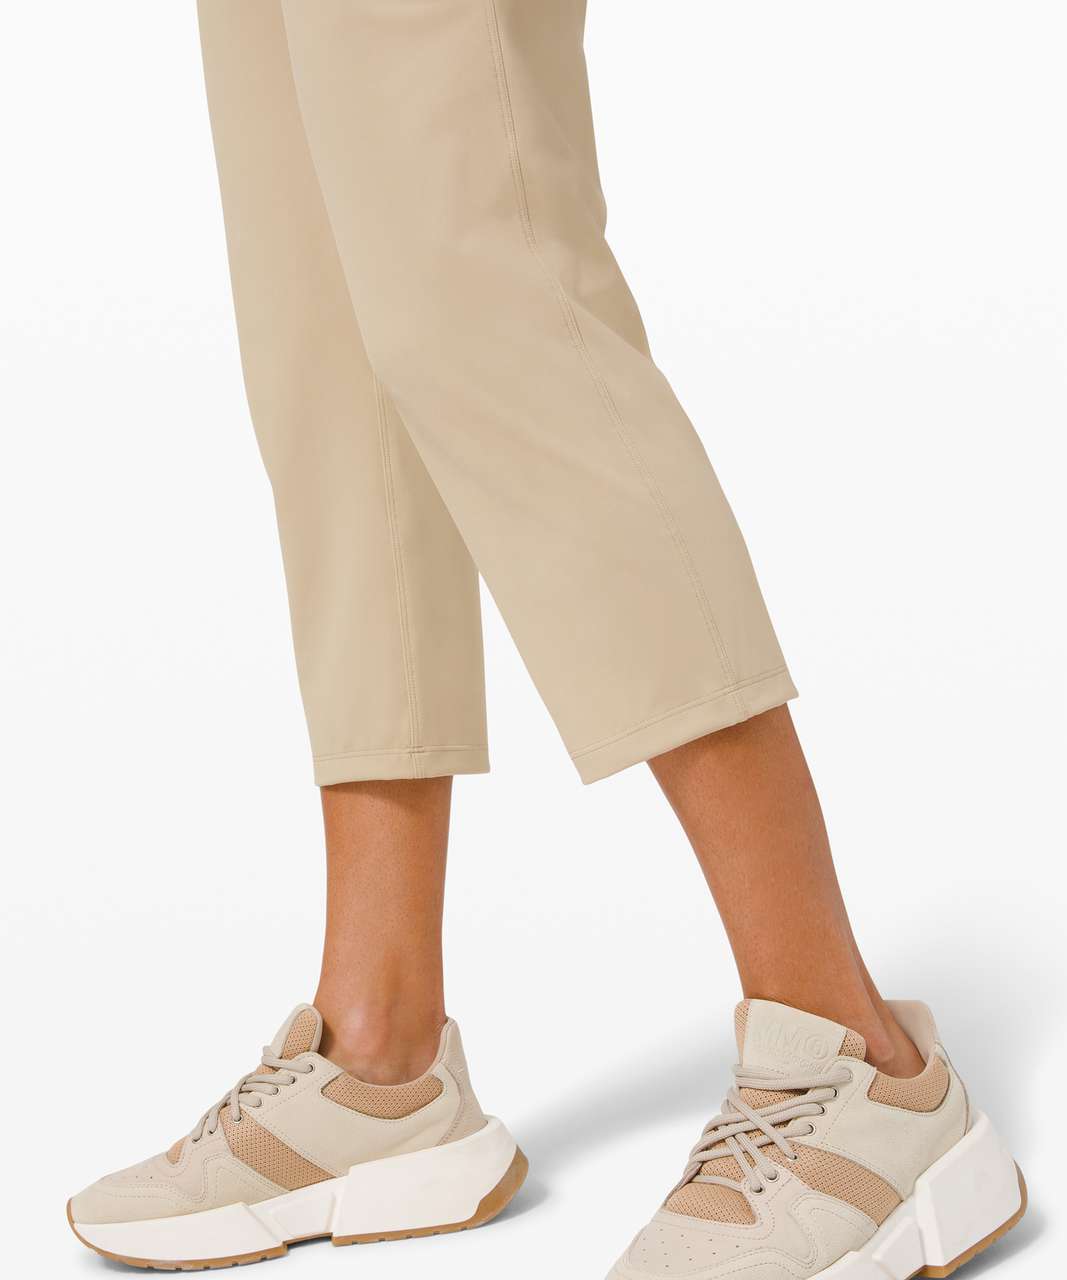 Lululemon Stretch High Rise Crop 23" - Trench (First Release)